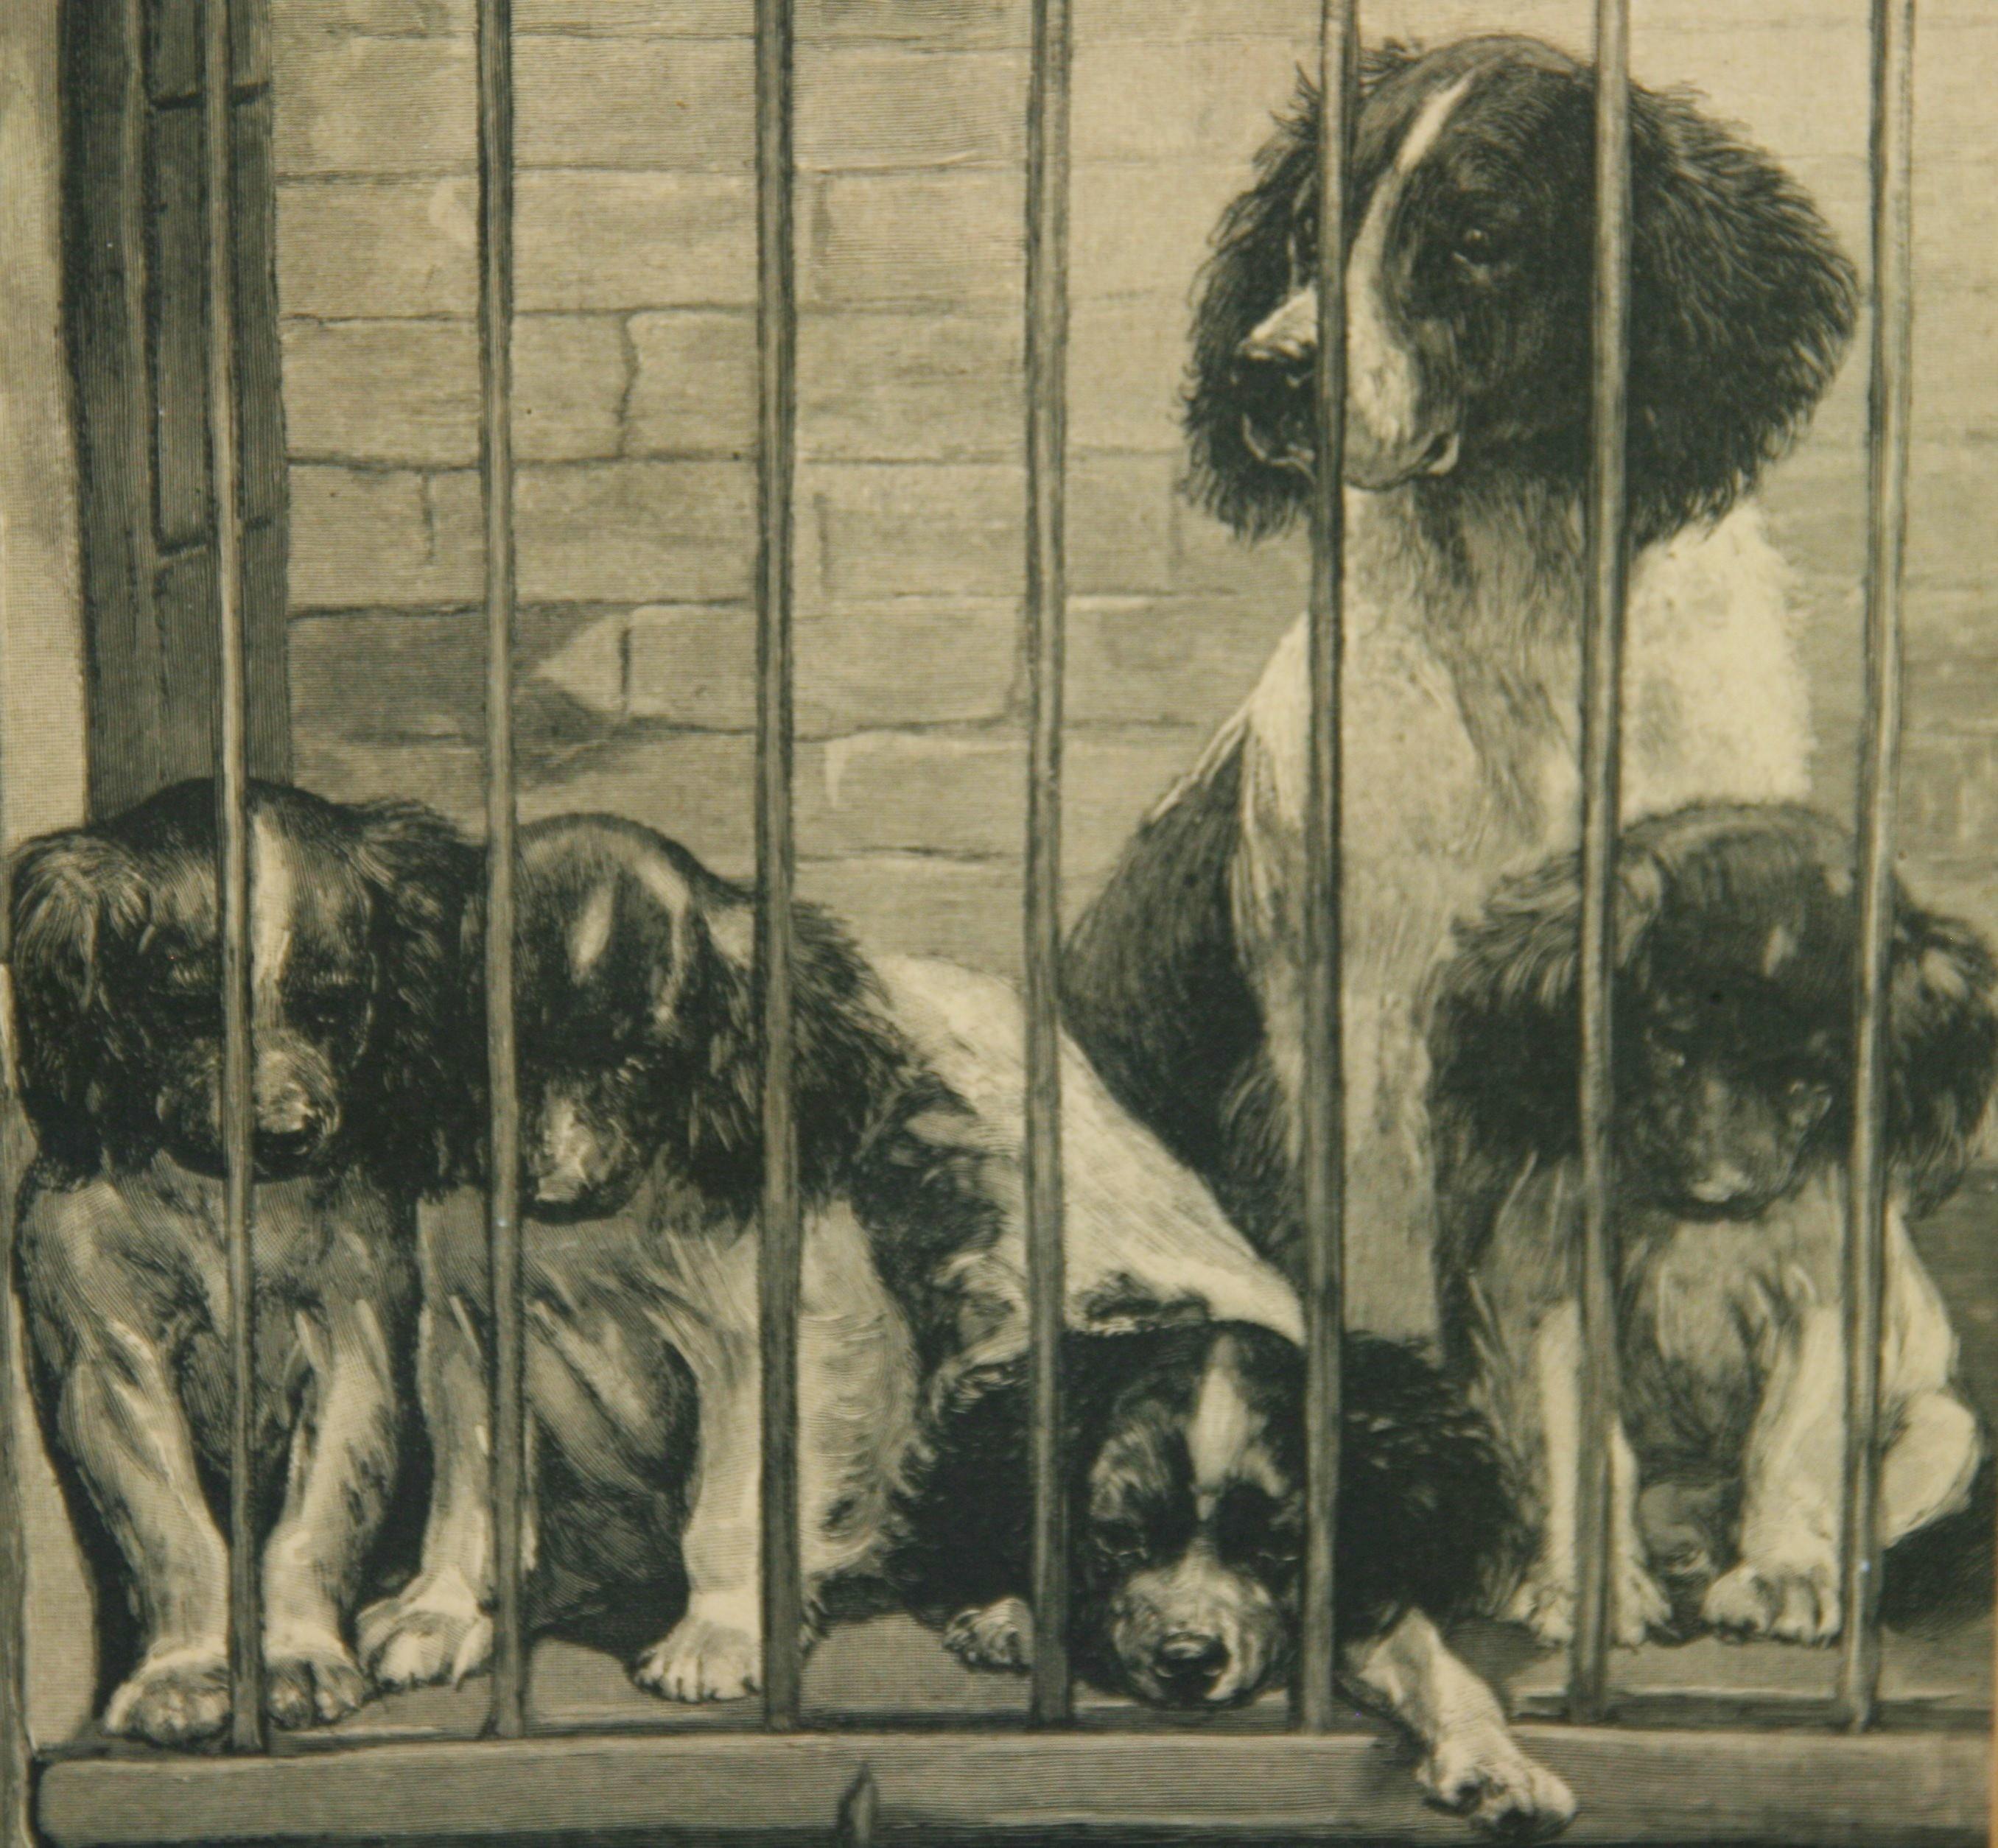 3881 Dogs and Cats Animal Engraving
Image size 11.5x8